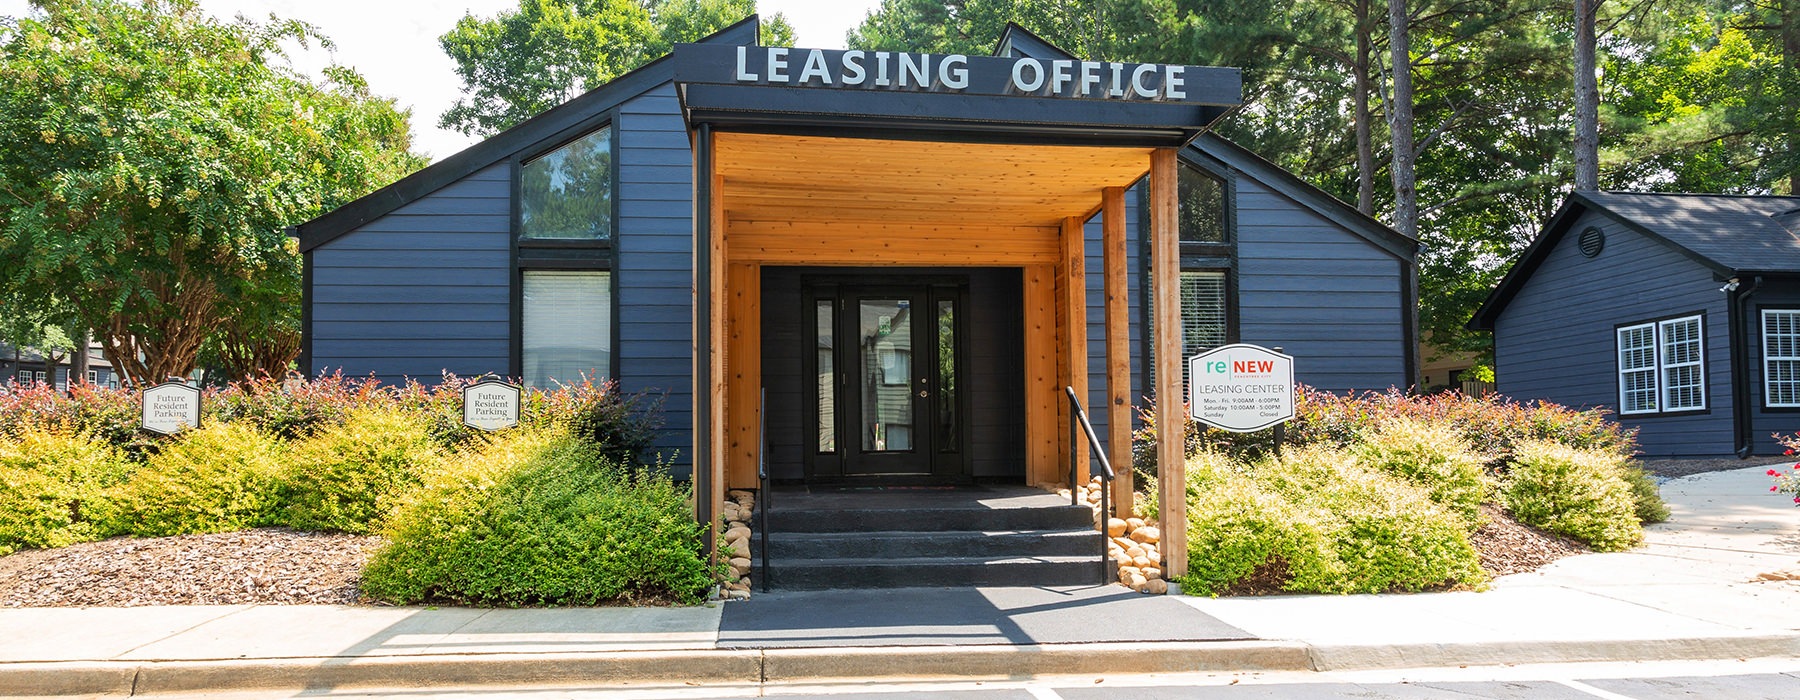 Exterior view of the leasing office at The Greens at Peachtree City